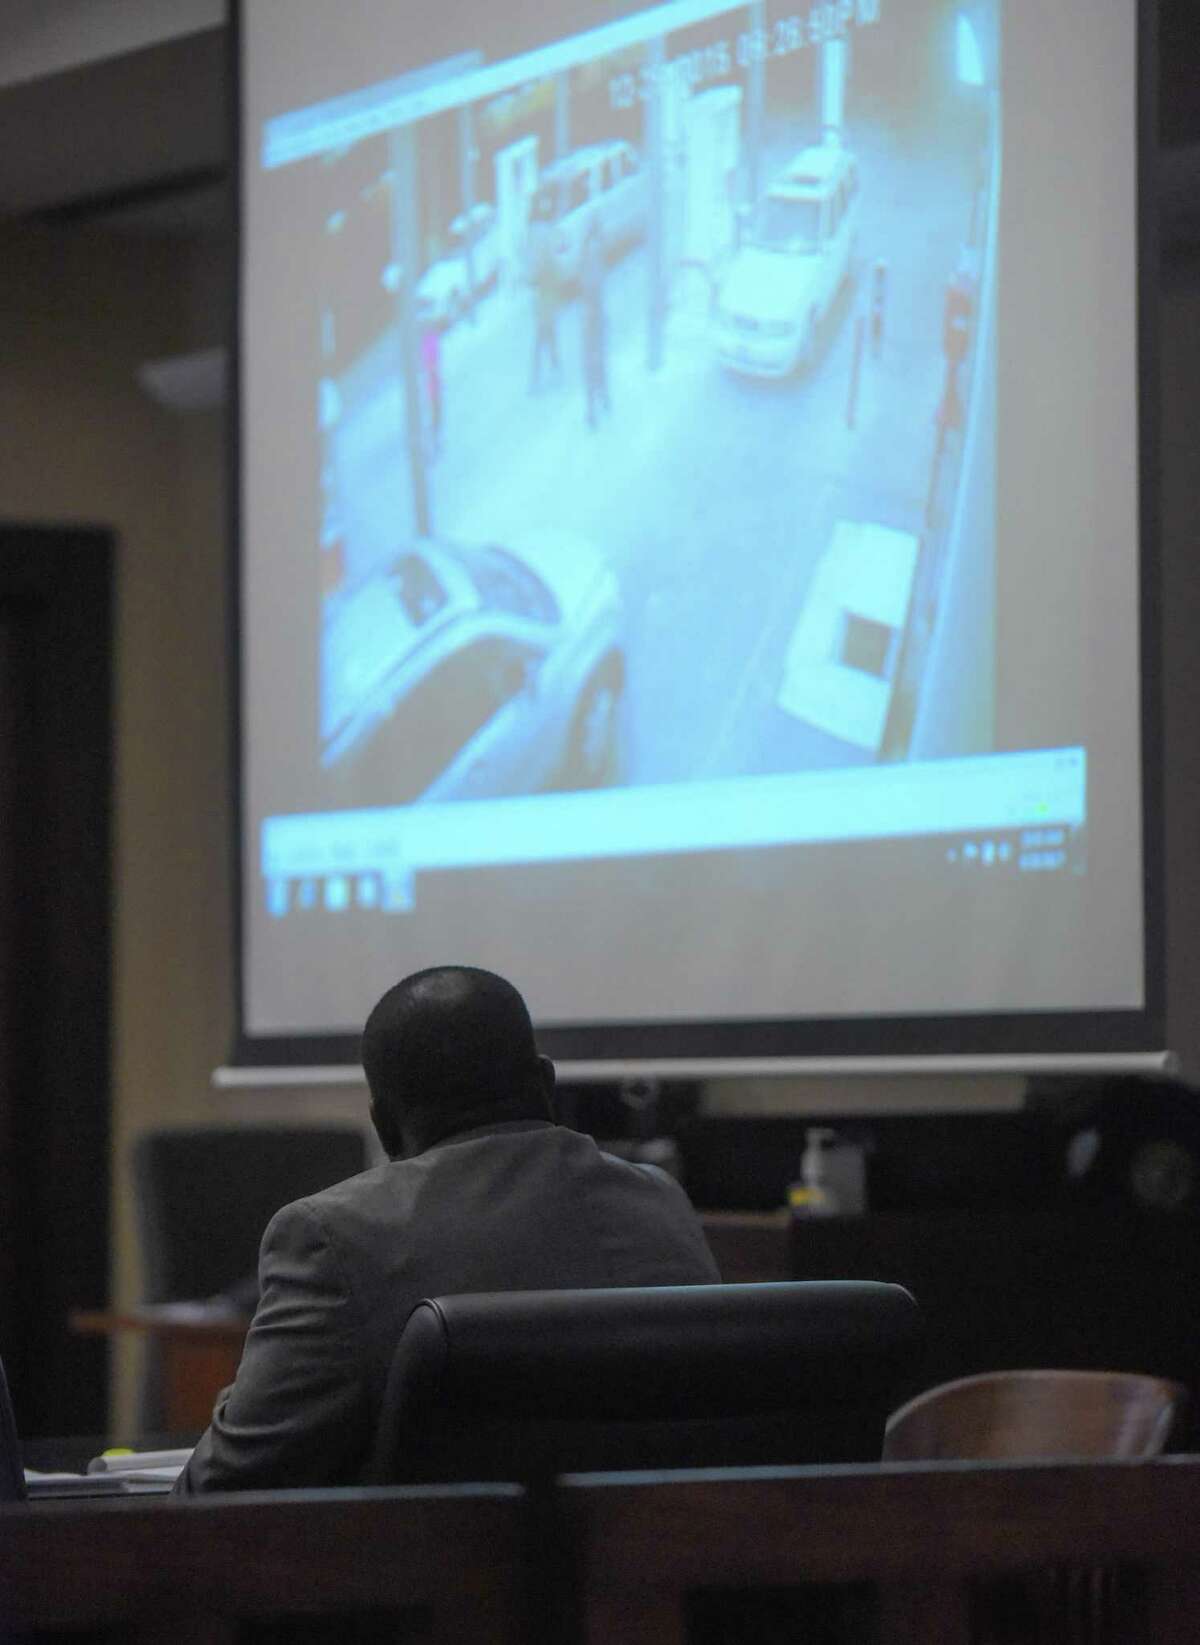 William Porter, accused of murder in the Christmas 2015 death of Trayvouns Edwards, watches a video of the event at which he allegedly shot Edward, in 186th District Court on Tuesday, Aug. 29, 2017.